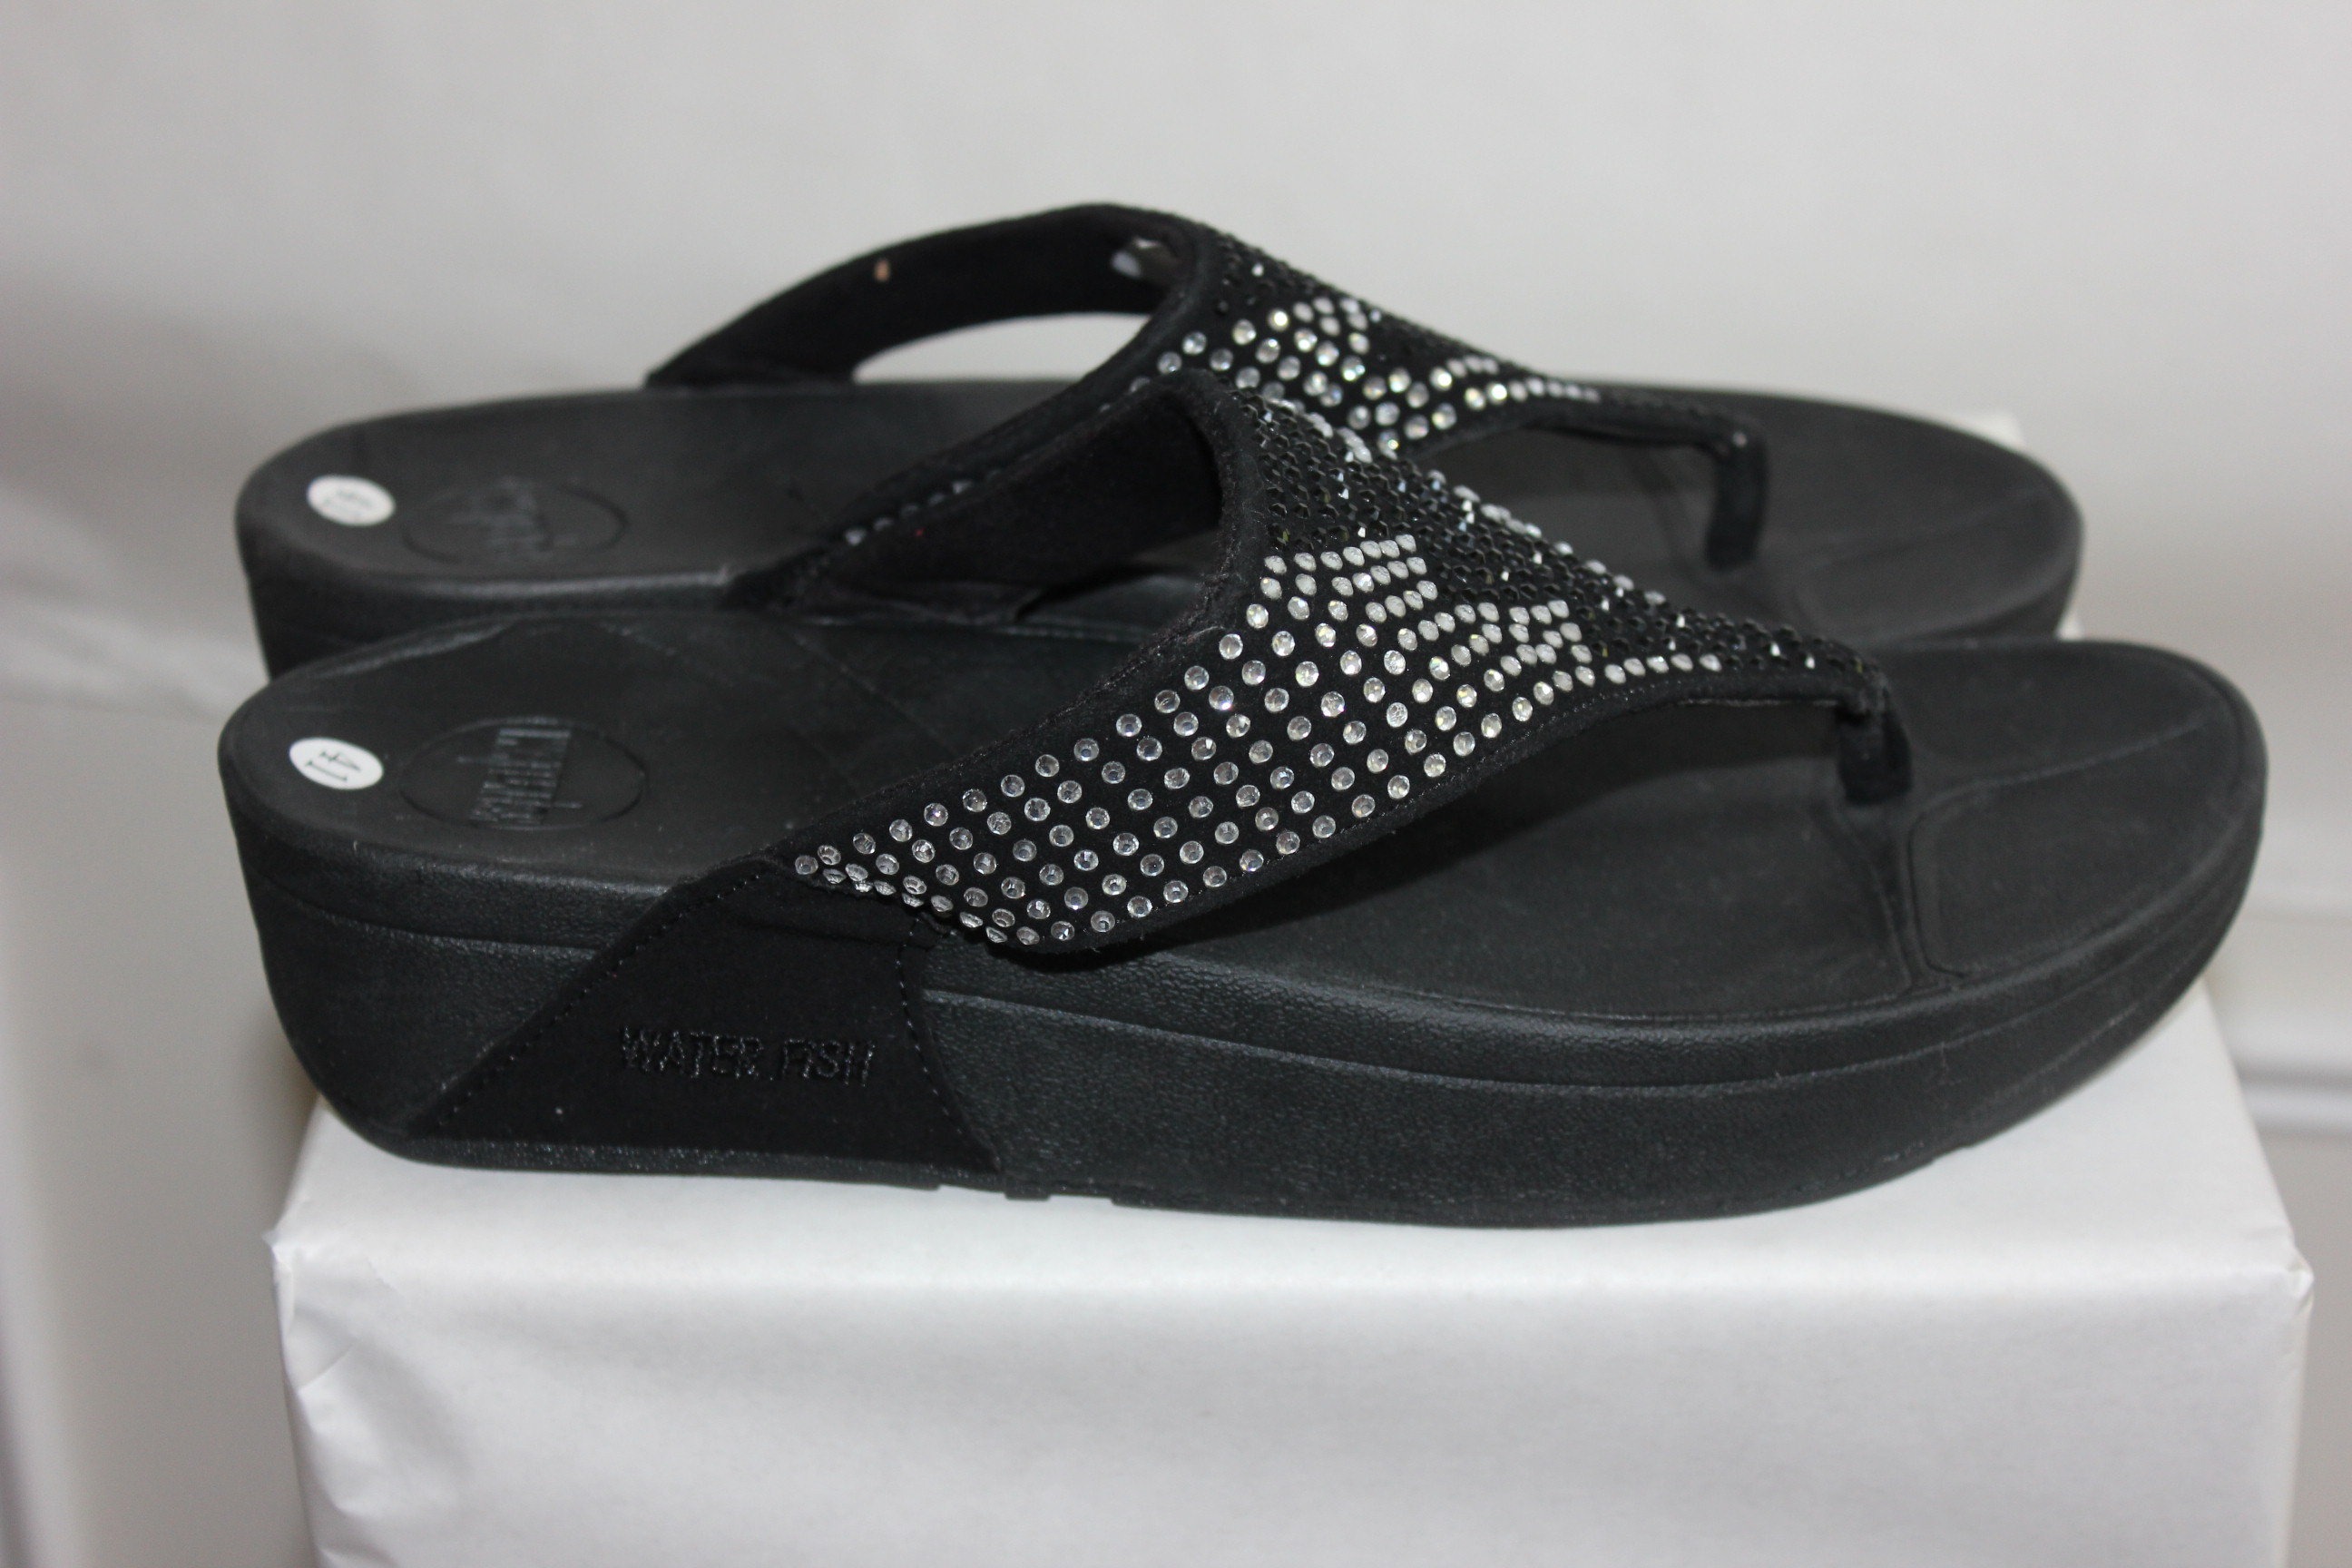 NEW CUSHIONED BLACK FLIP-FLOP SANDAL SLIPPERS SHOES SIZE 39 ...